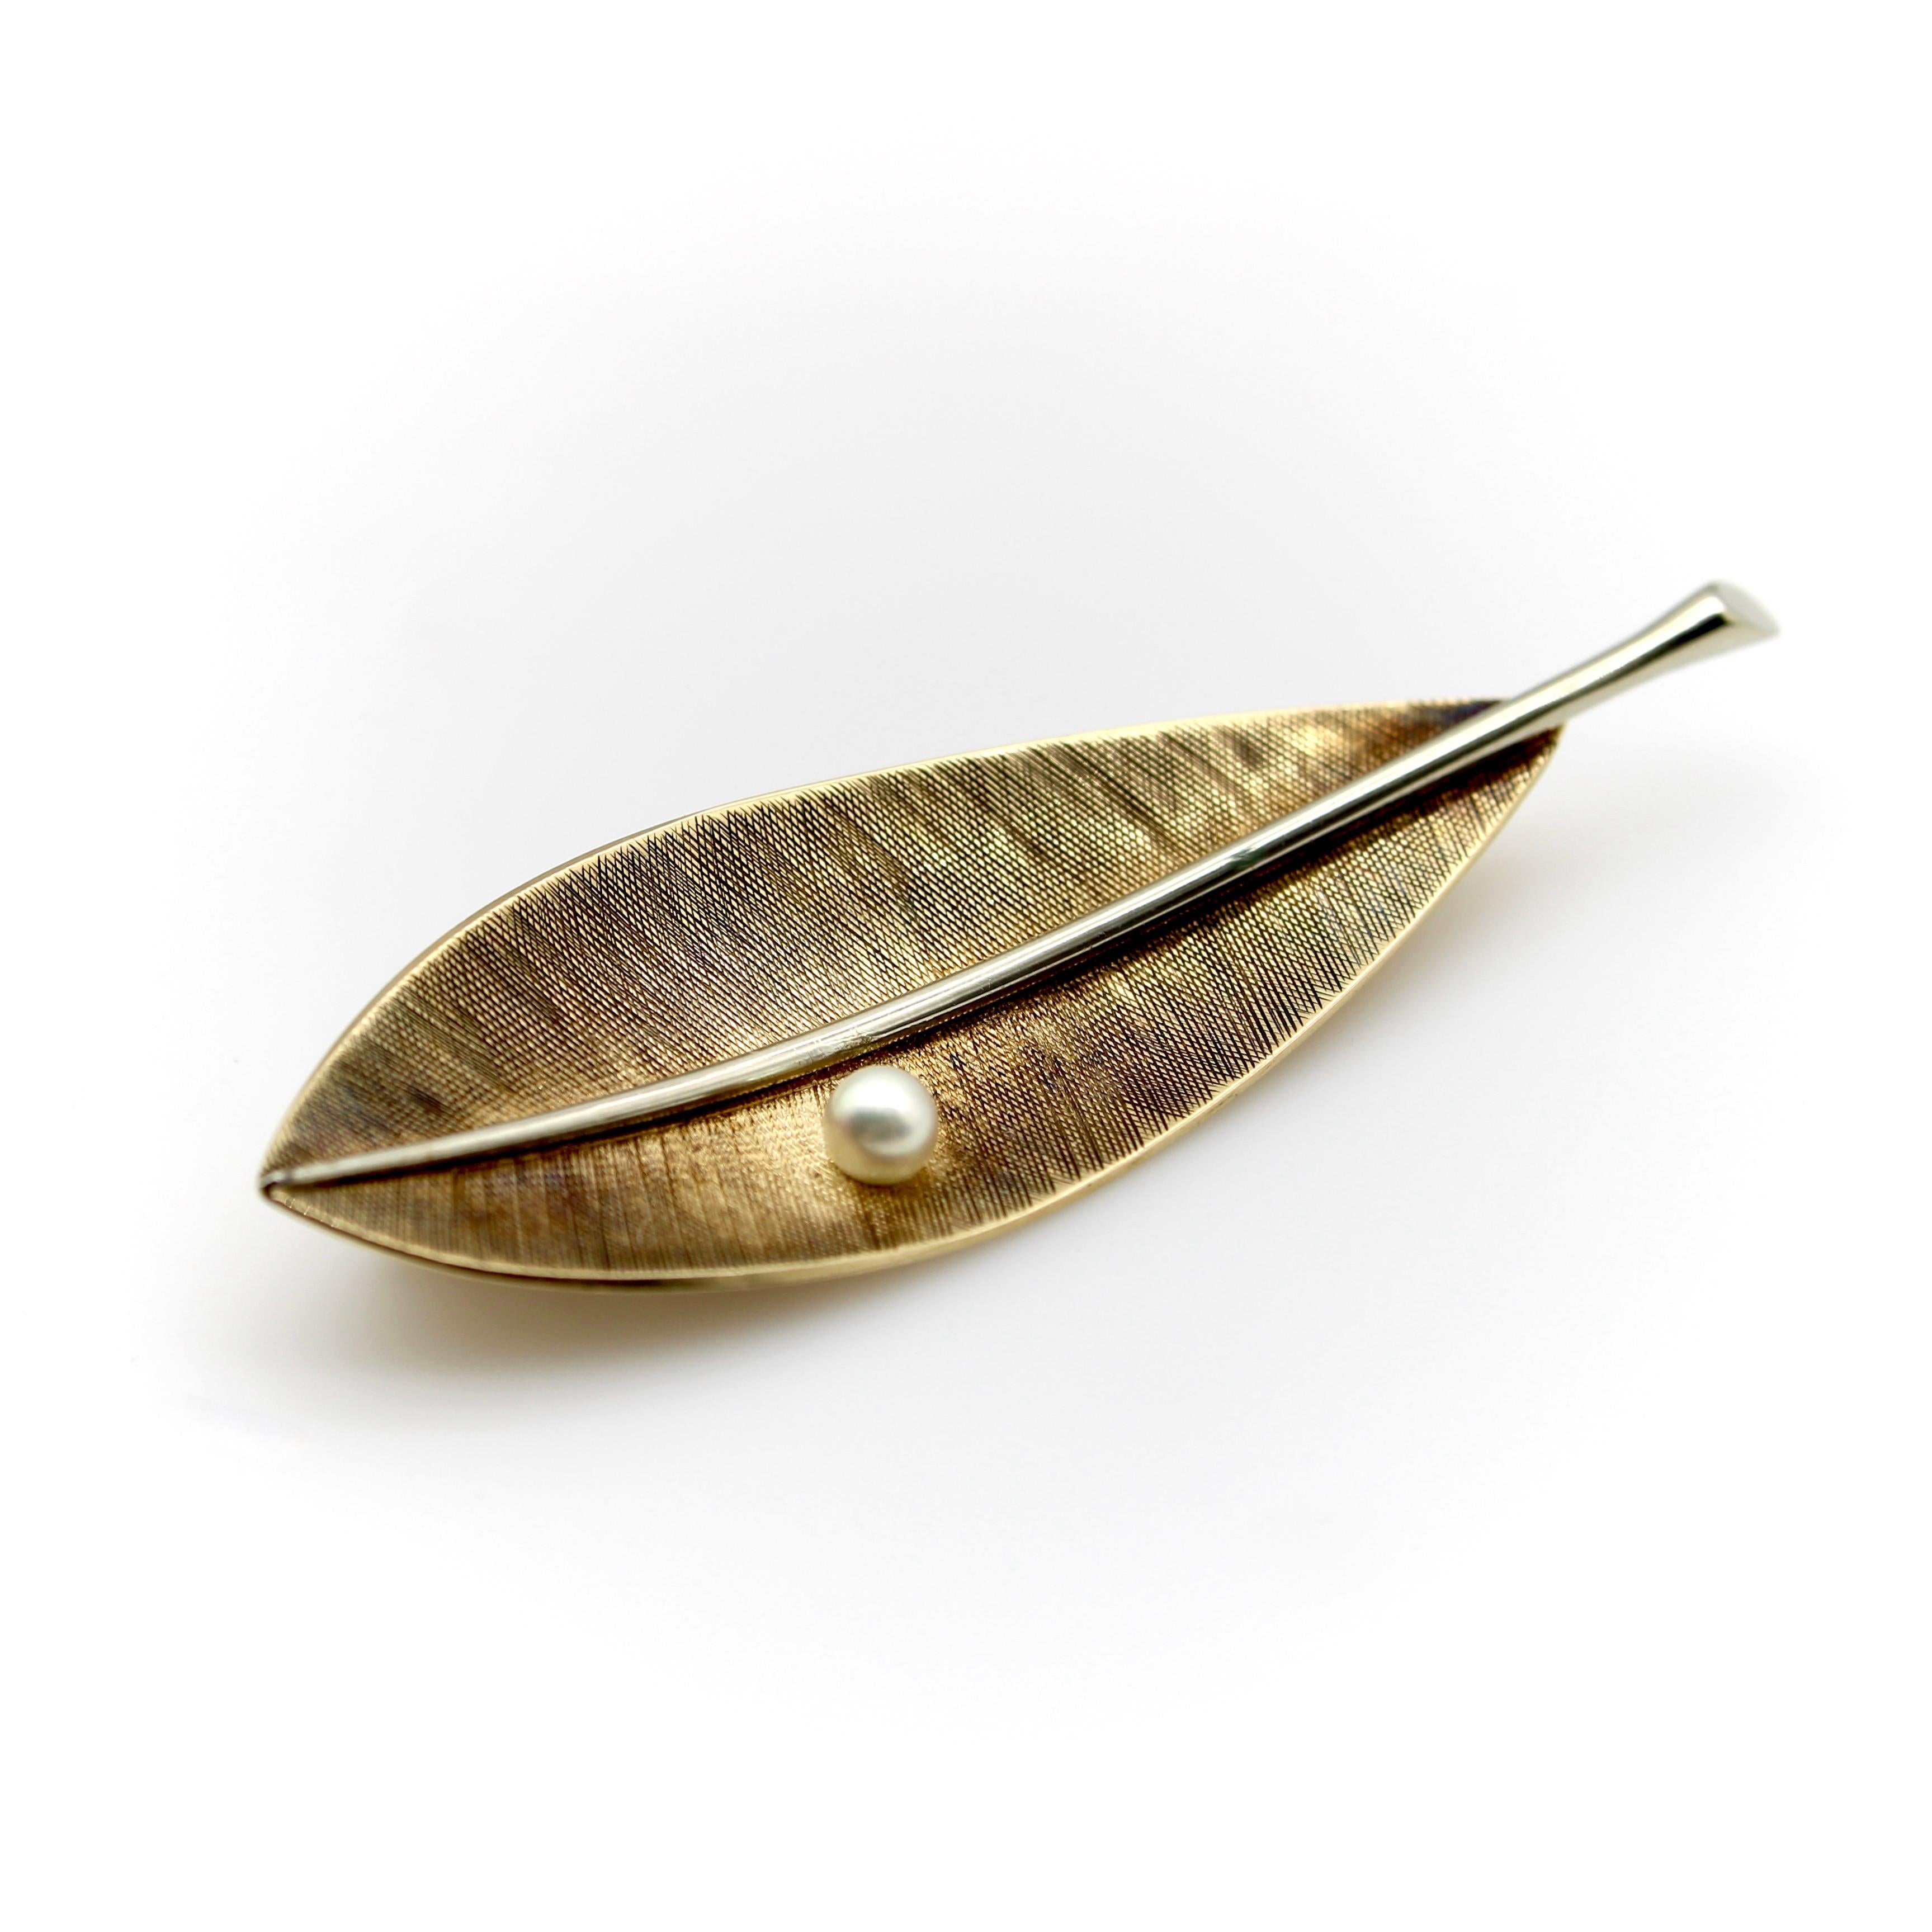 Elegant and simplistic in design, this leaf in yellow and white 14k gold is a classic Tiffany & Co. piece. A pearl sits on the crosshatched gold, looking like a drop of dew. Down the center of the leaf is the use of white gold as a stem that creates